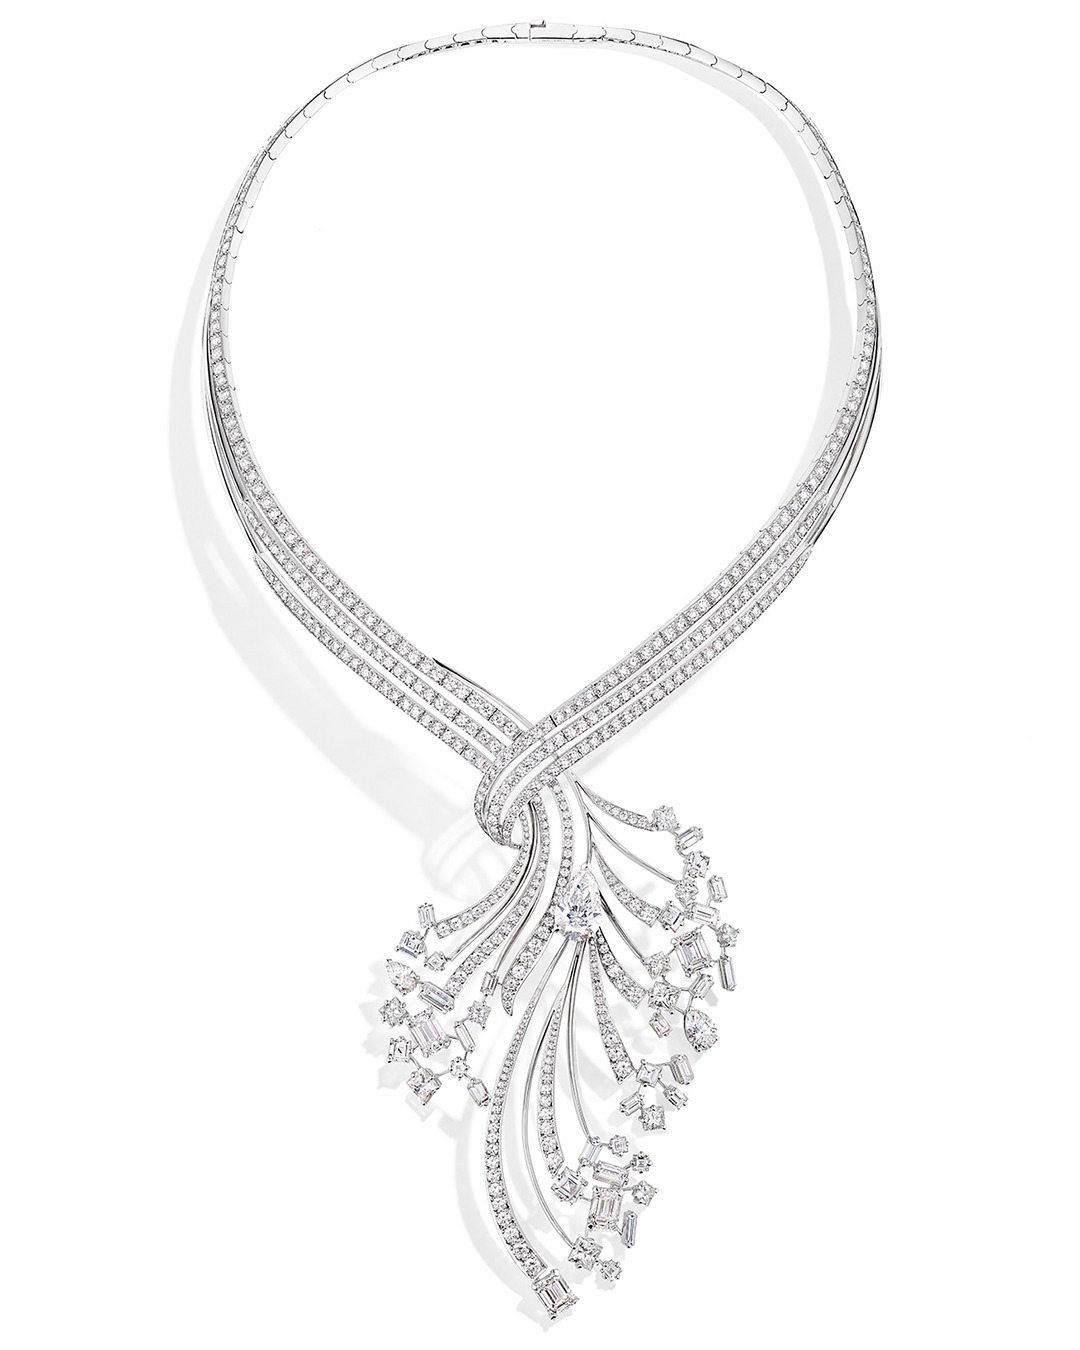 9 Beautiful High Jewelry Pieces from Paris Haute Couture Week